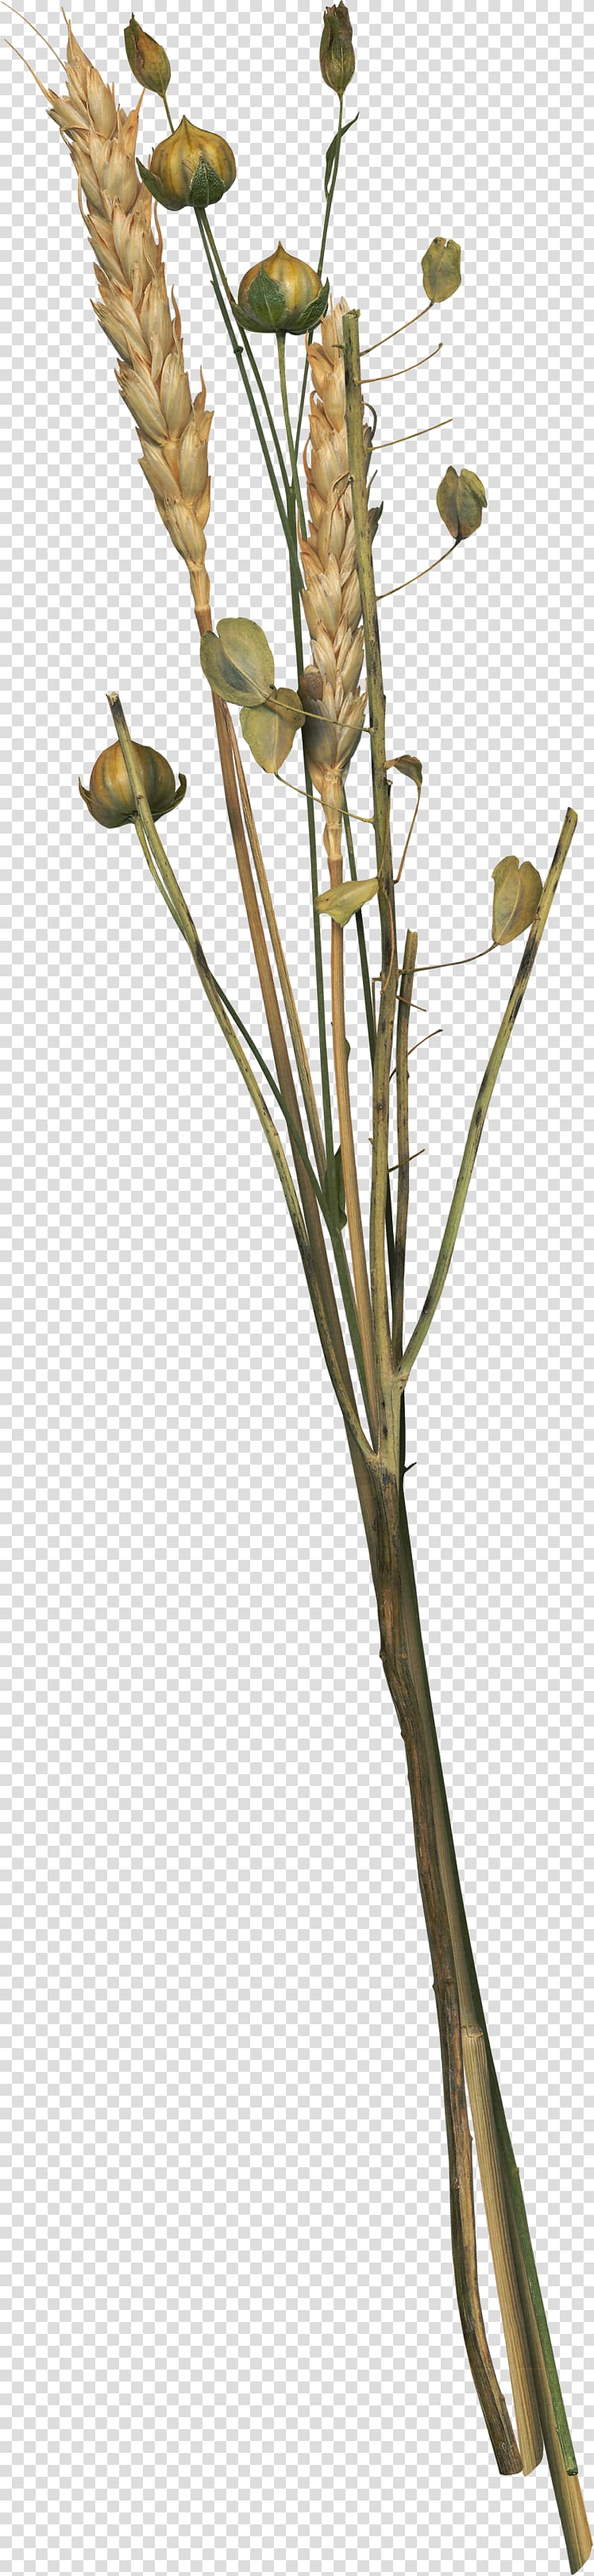 Flower Wheat, Wheat Flowers transparent background PNG clipart